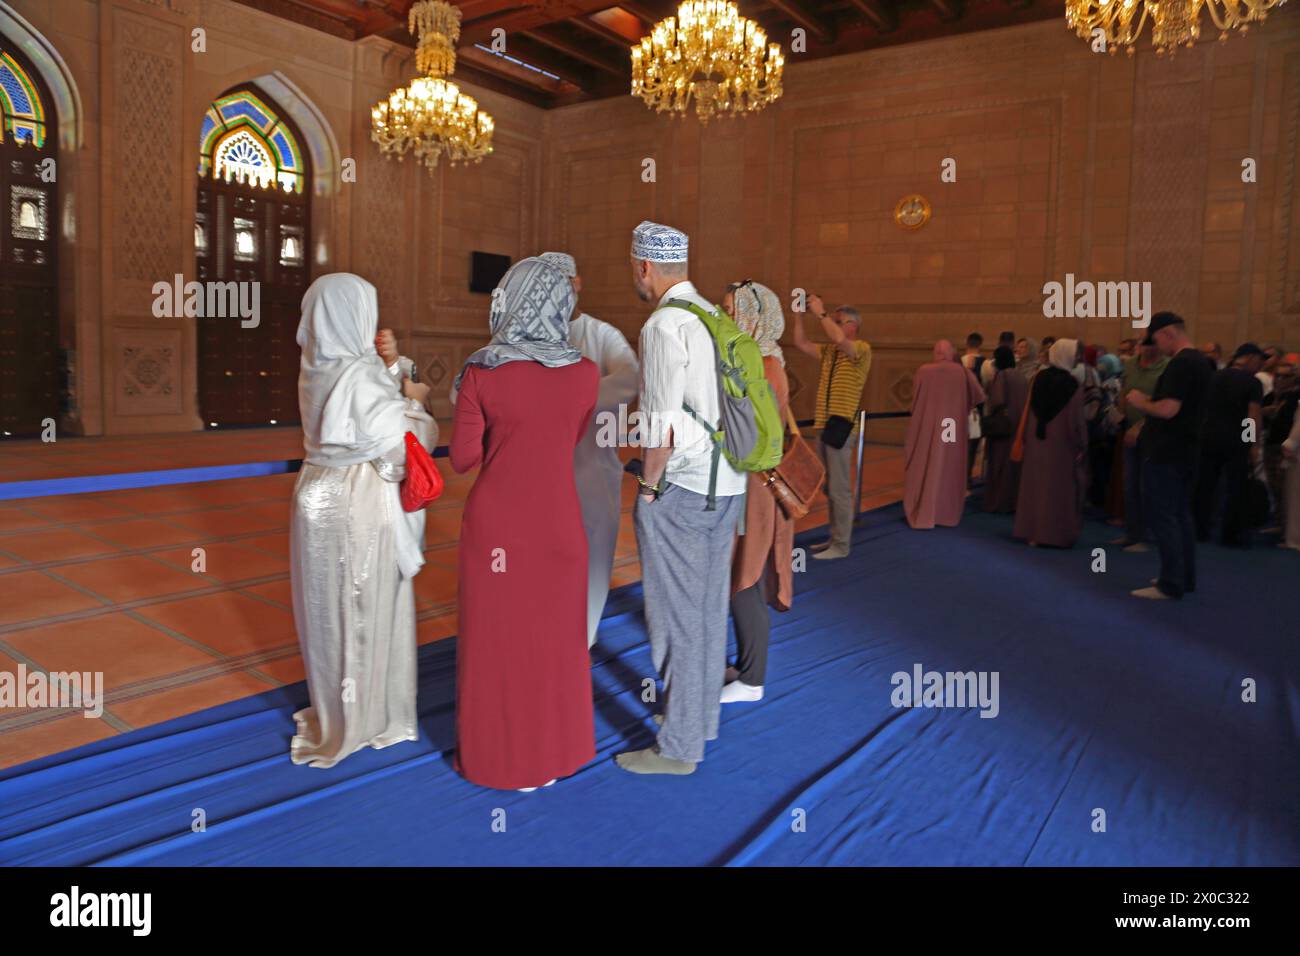 Sultan Qaboos Grand Mosque Tourists Standing on Blue Cover to Protect the Prayer Carpet in the Womenn's Prayer Room Muscat Oman Stock Photo